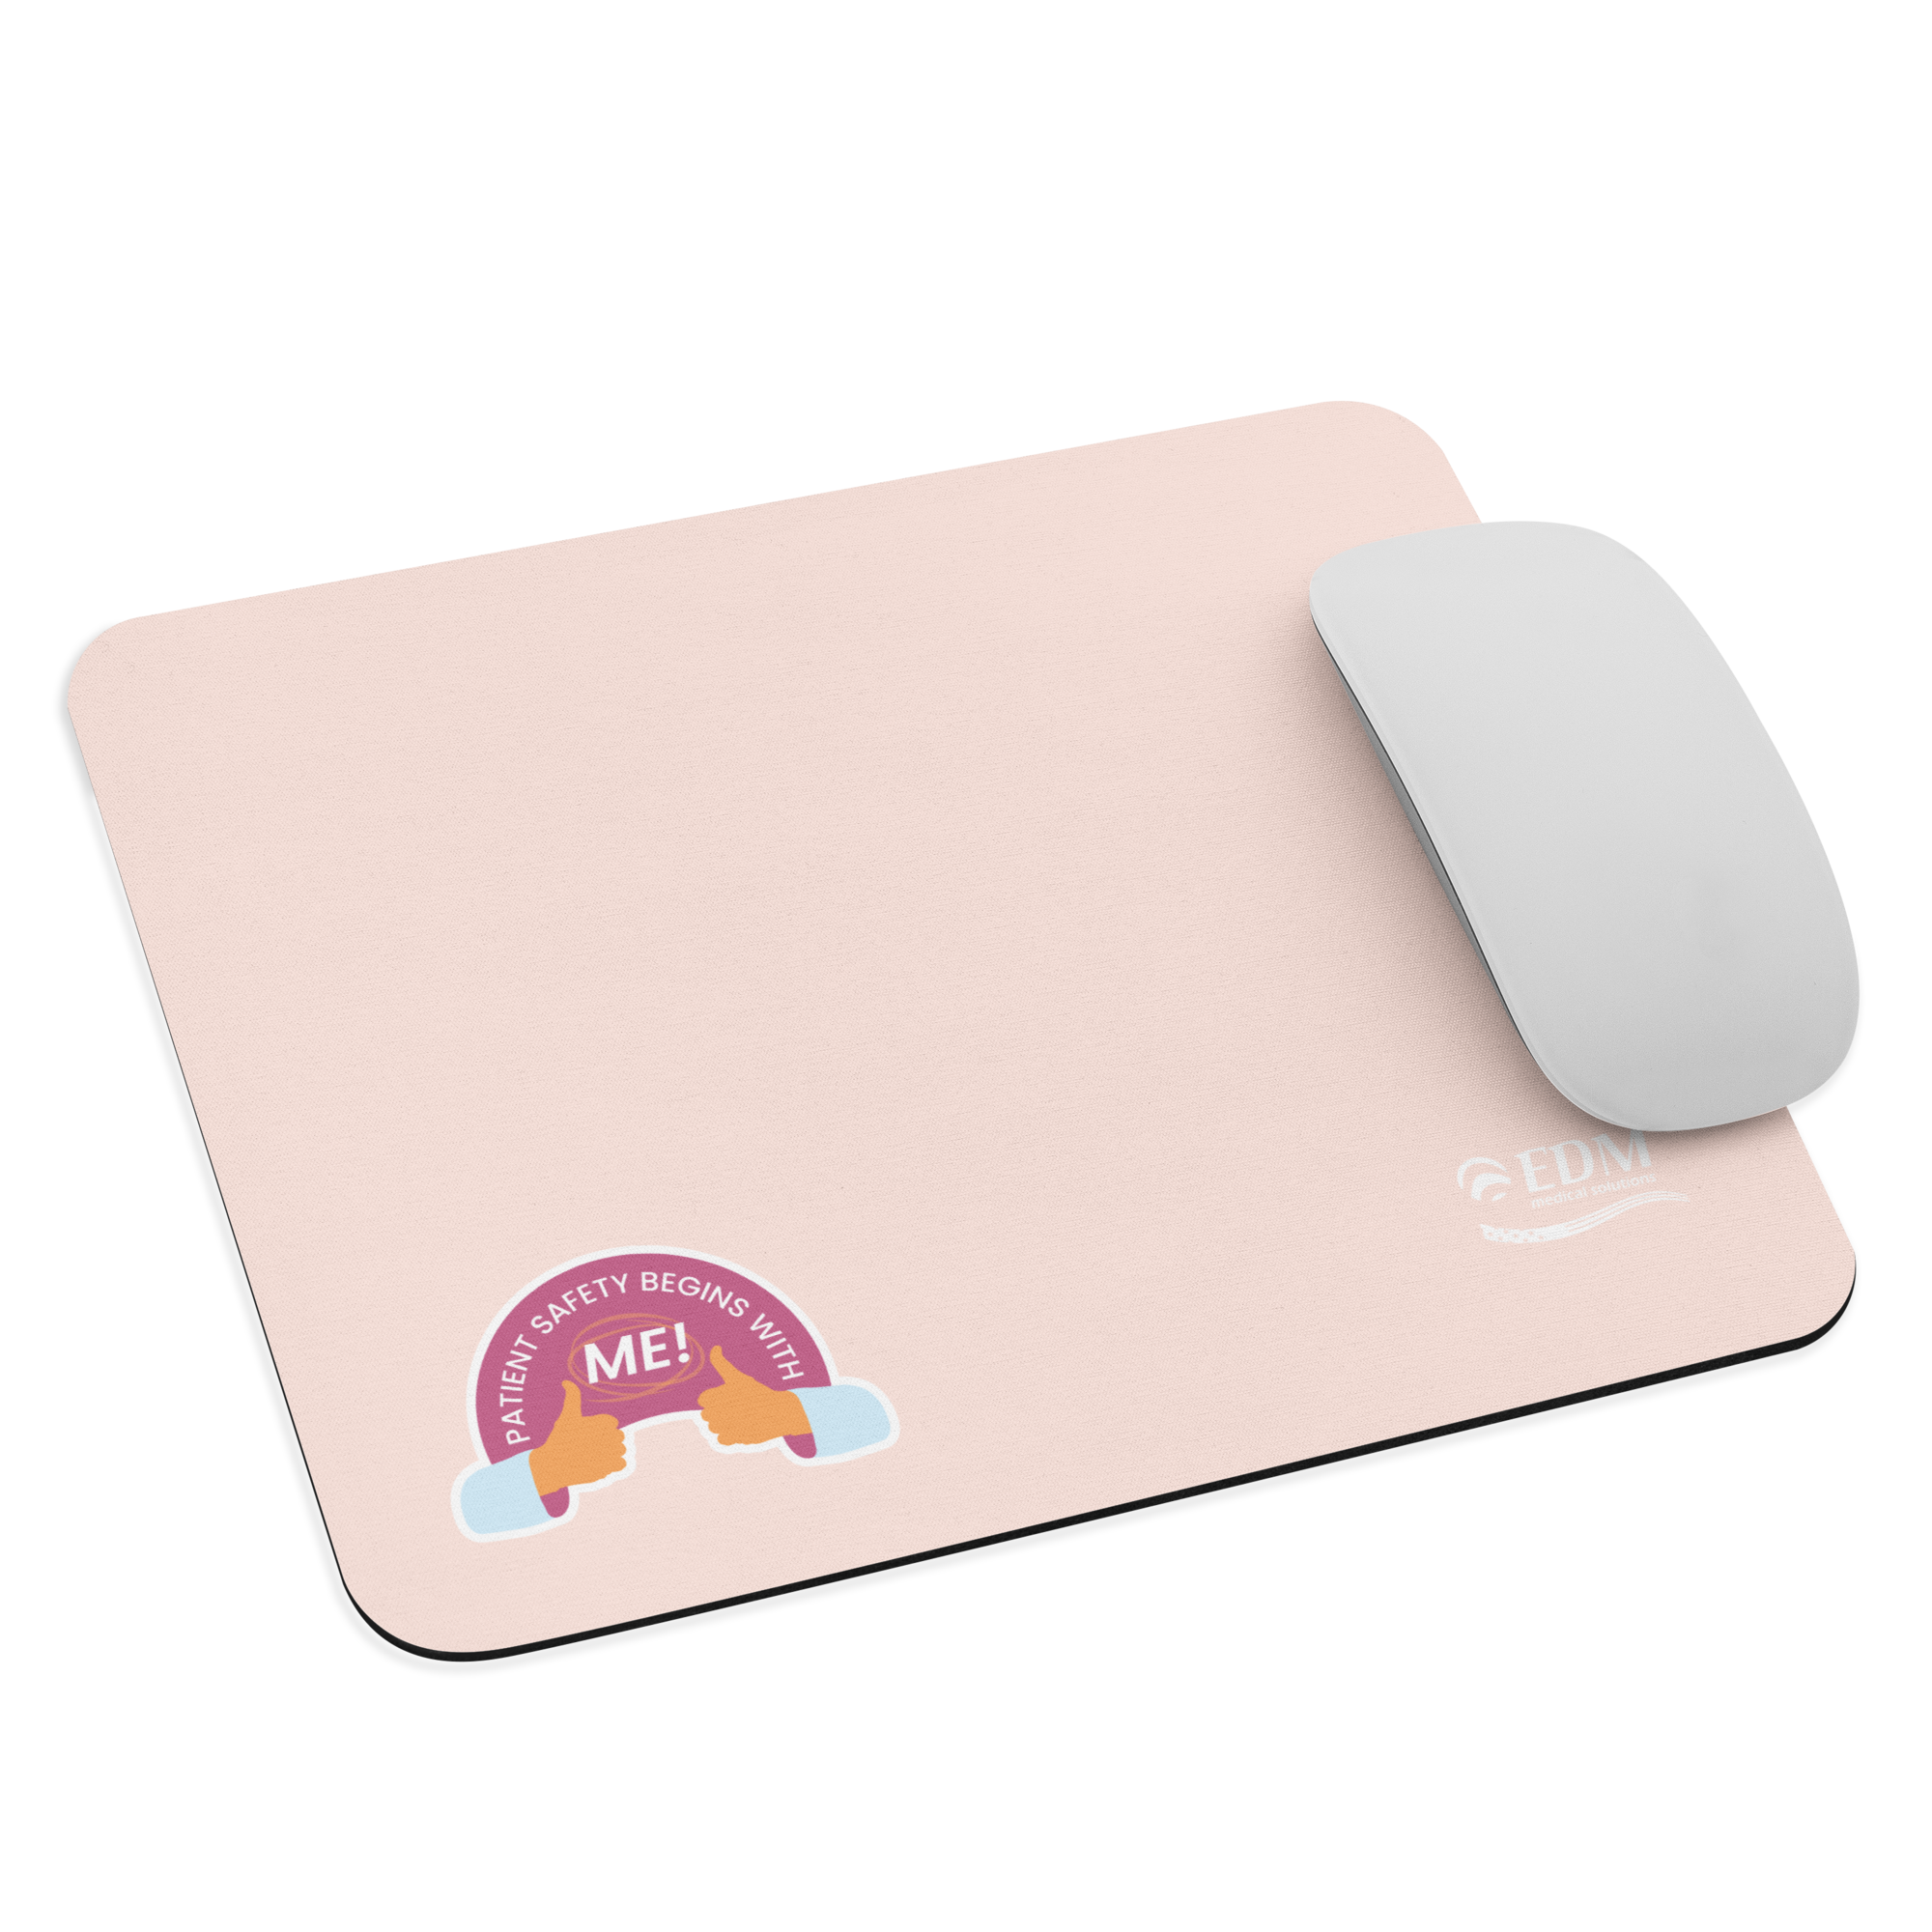 Mouse Pad - Pink - Patient Safety Begins With Me!